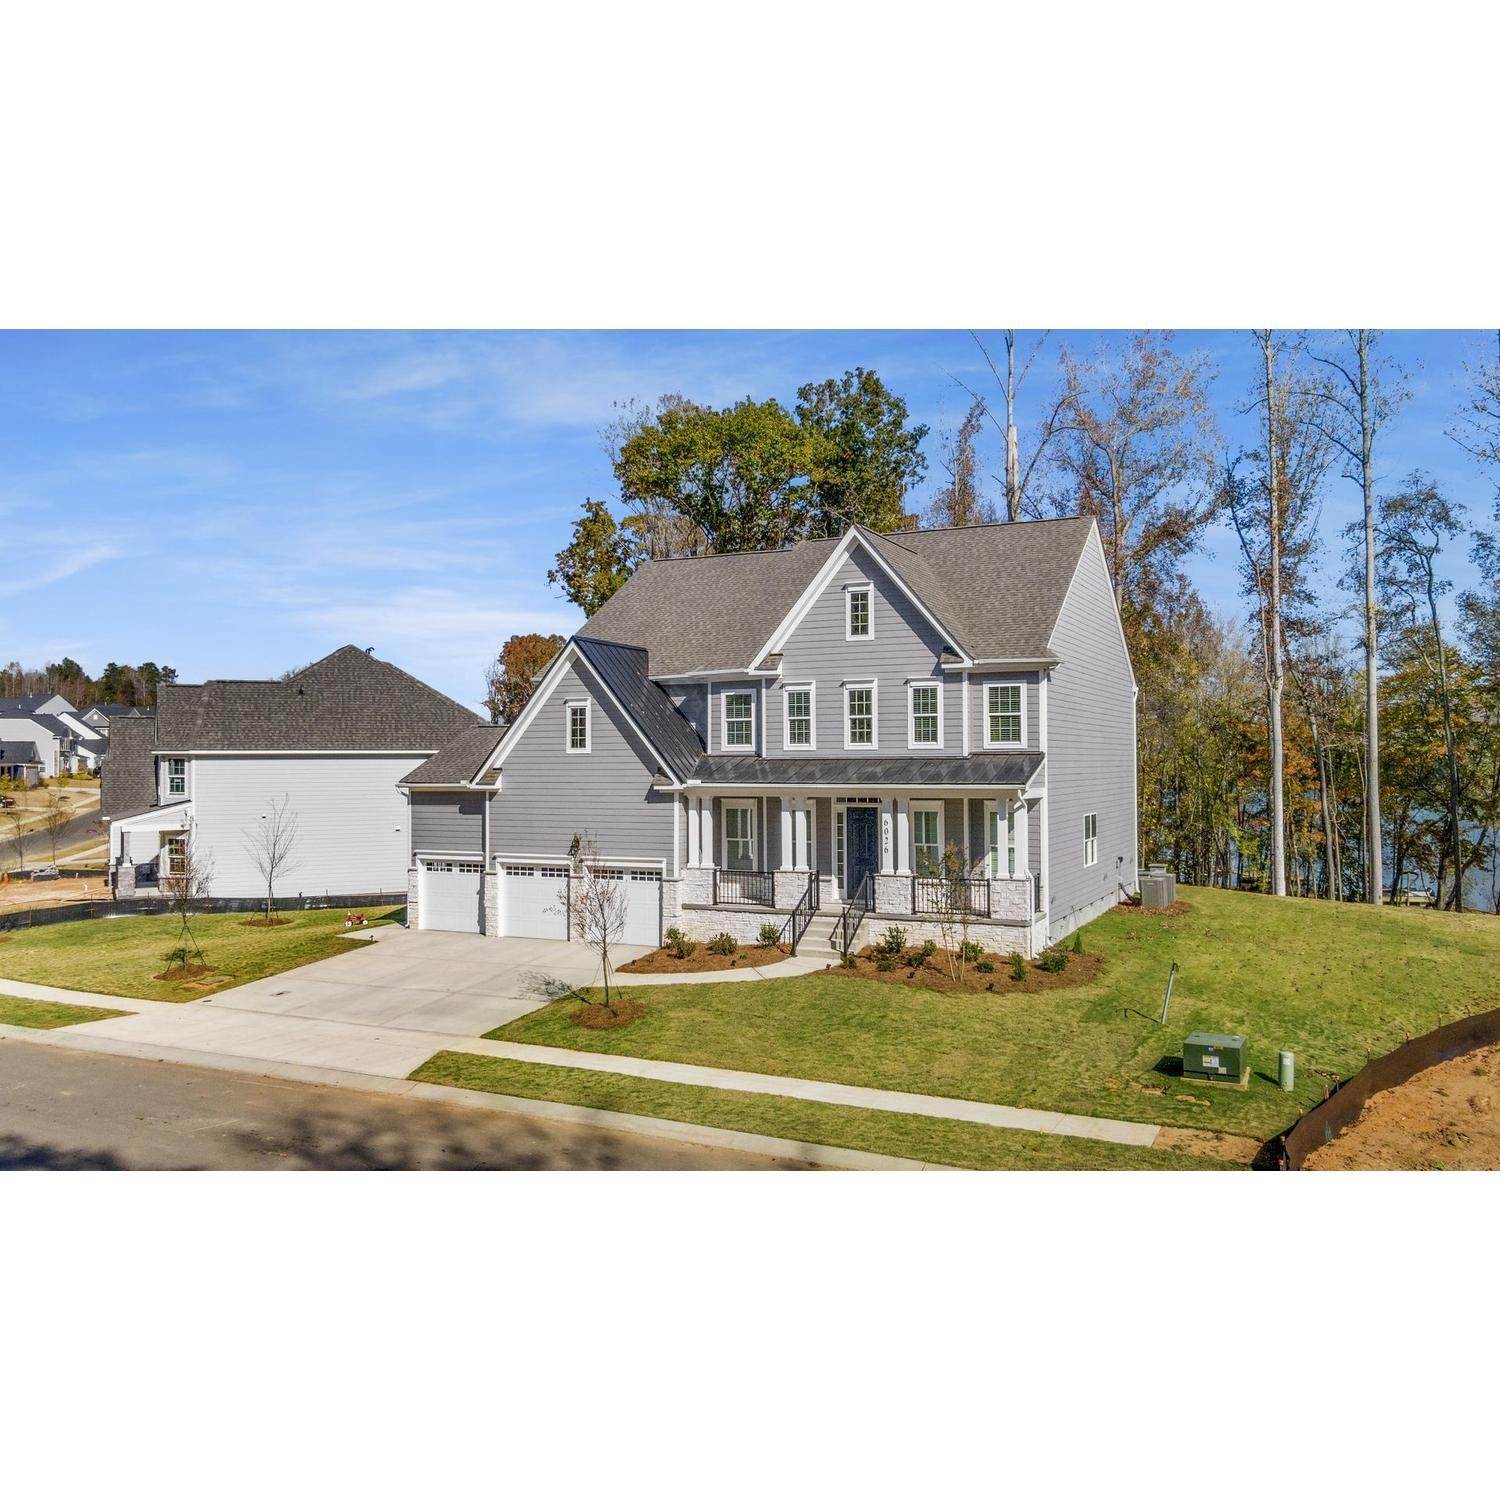 13. Waterfront at The Vineyards on Lake Wylie bâtiment à 6200 Jepson Ct, Charlotte, NC 28214